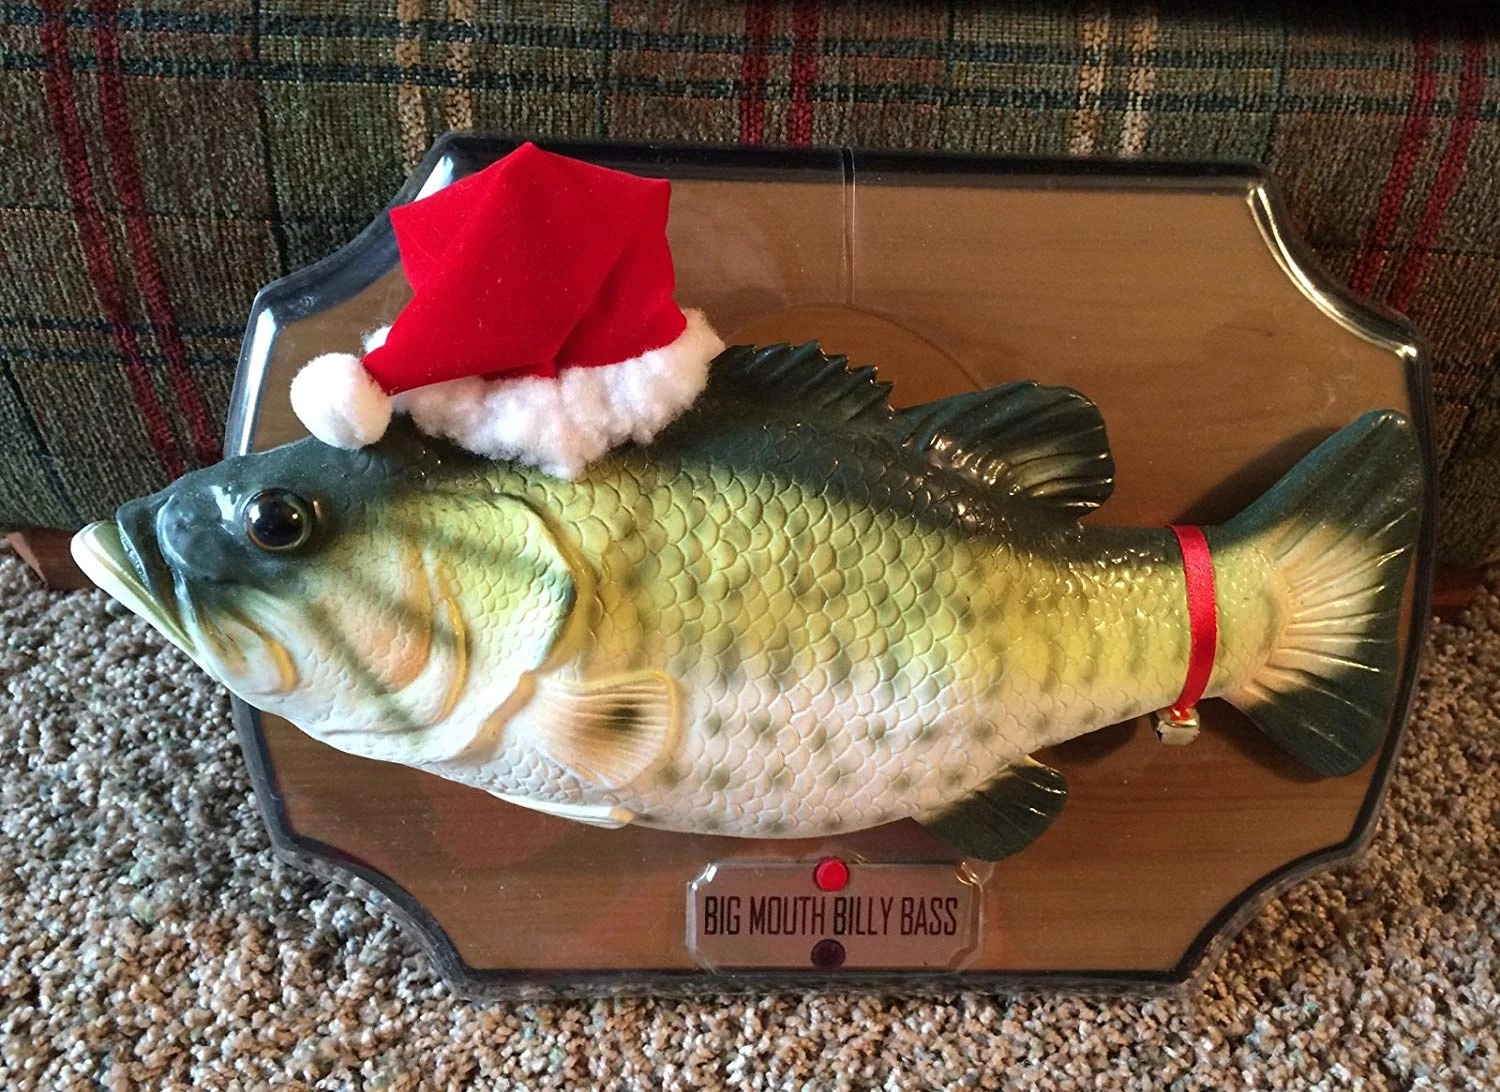 You Can Now Get An Amazon Alexa 'Big Mouth Billy Bass' [VIDEO]